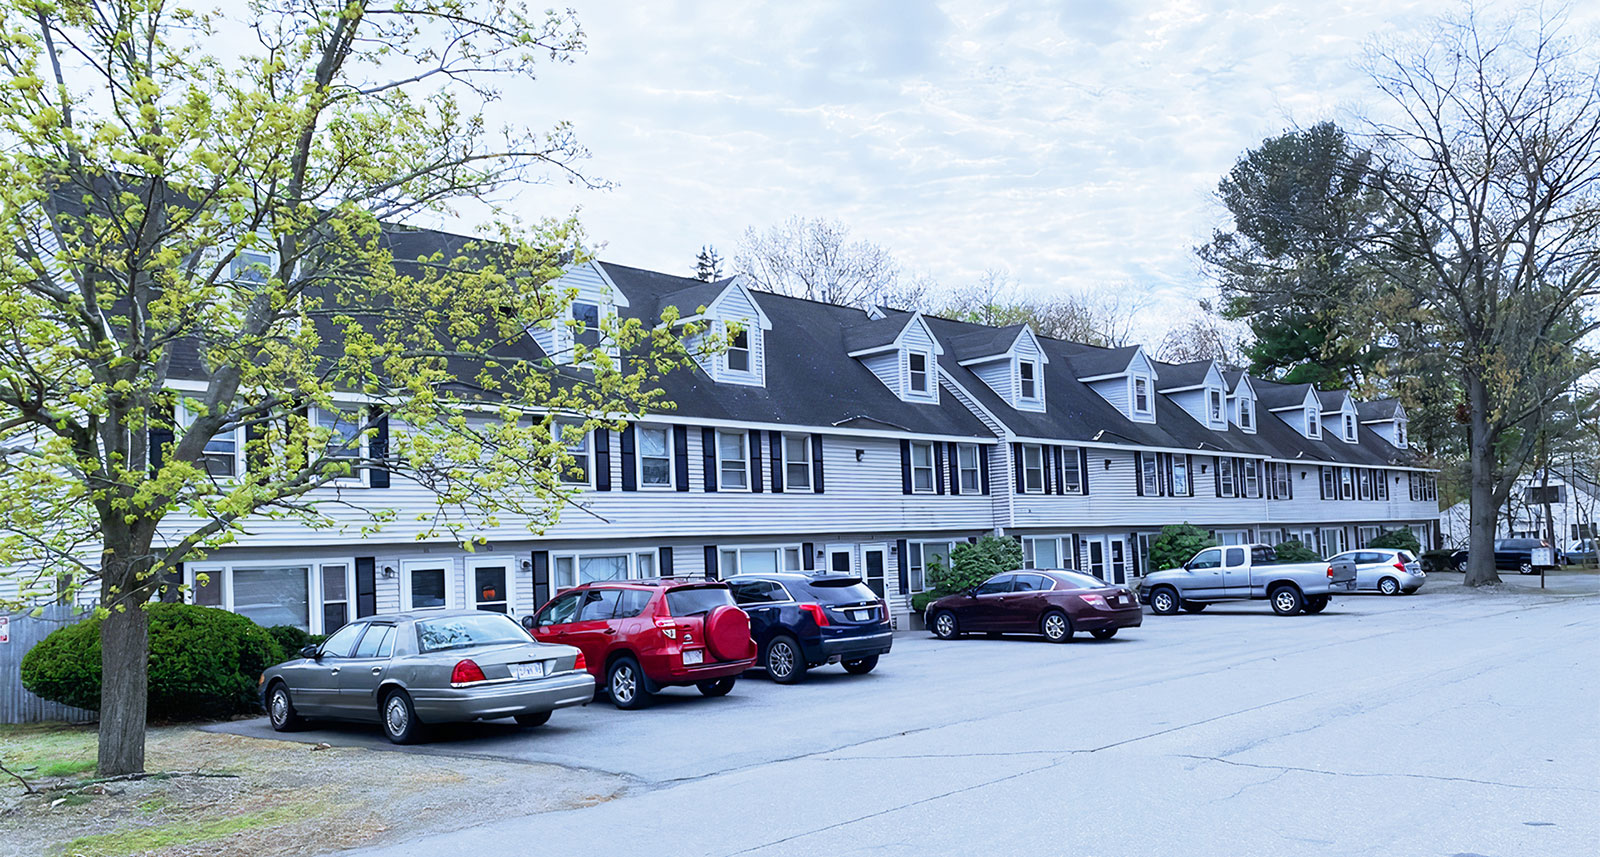 $4,560,000 Sale of Multifamily Real Estate in Lowell, MA